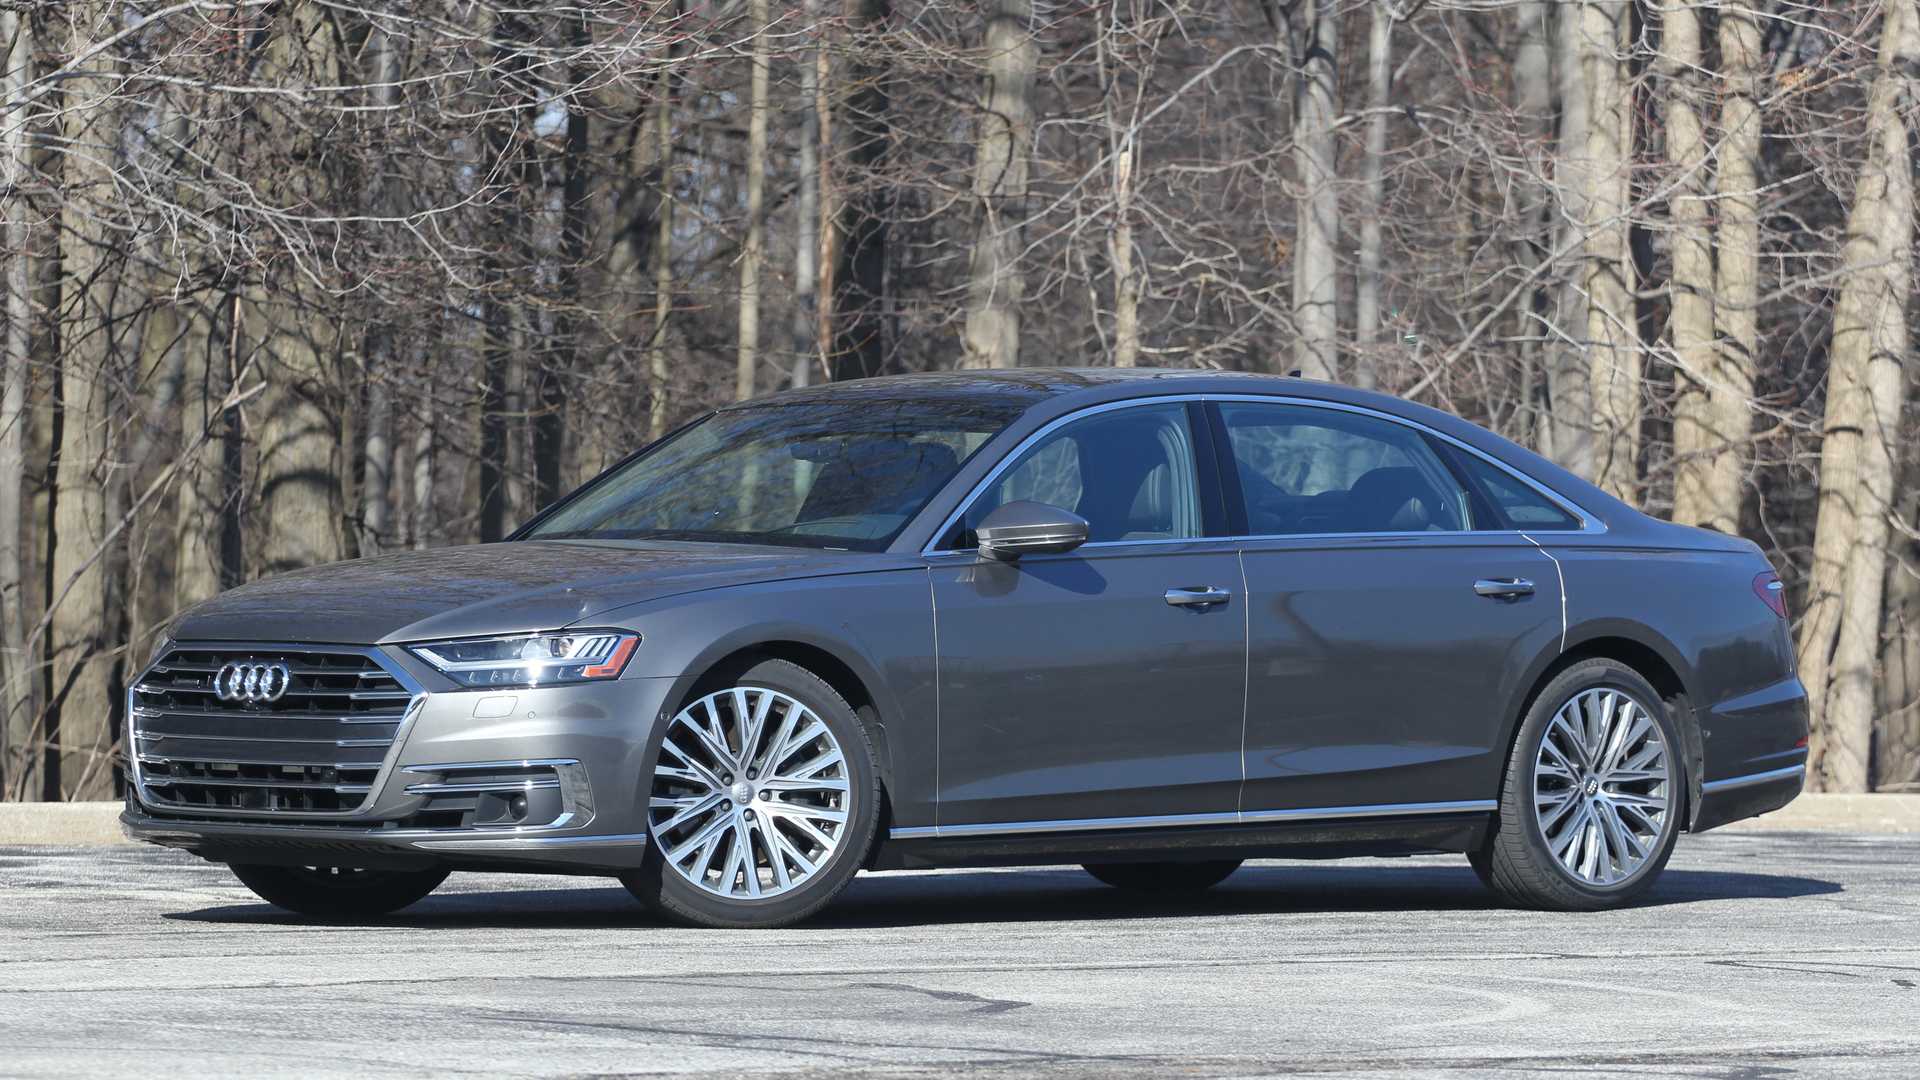 Audi A8 Review: Try Harder